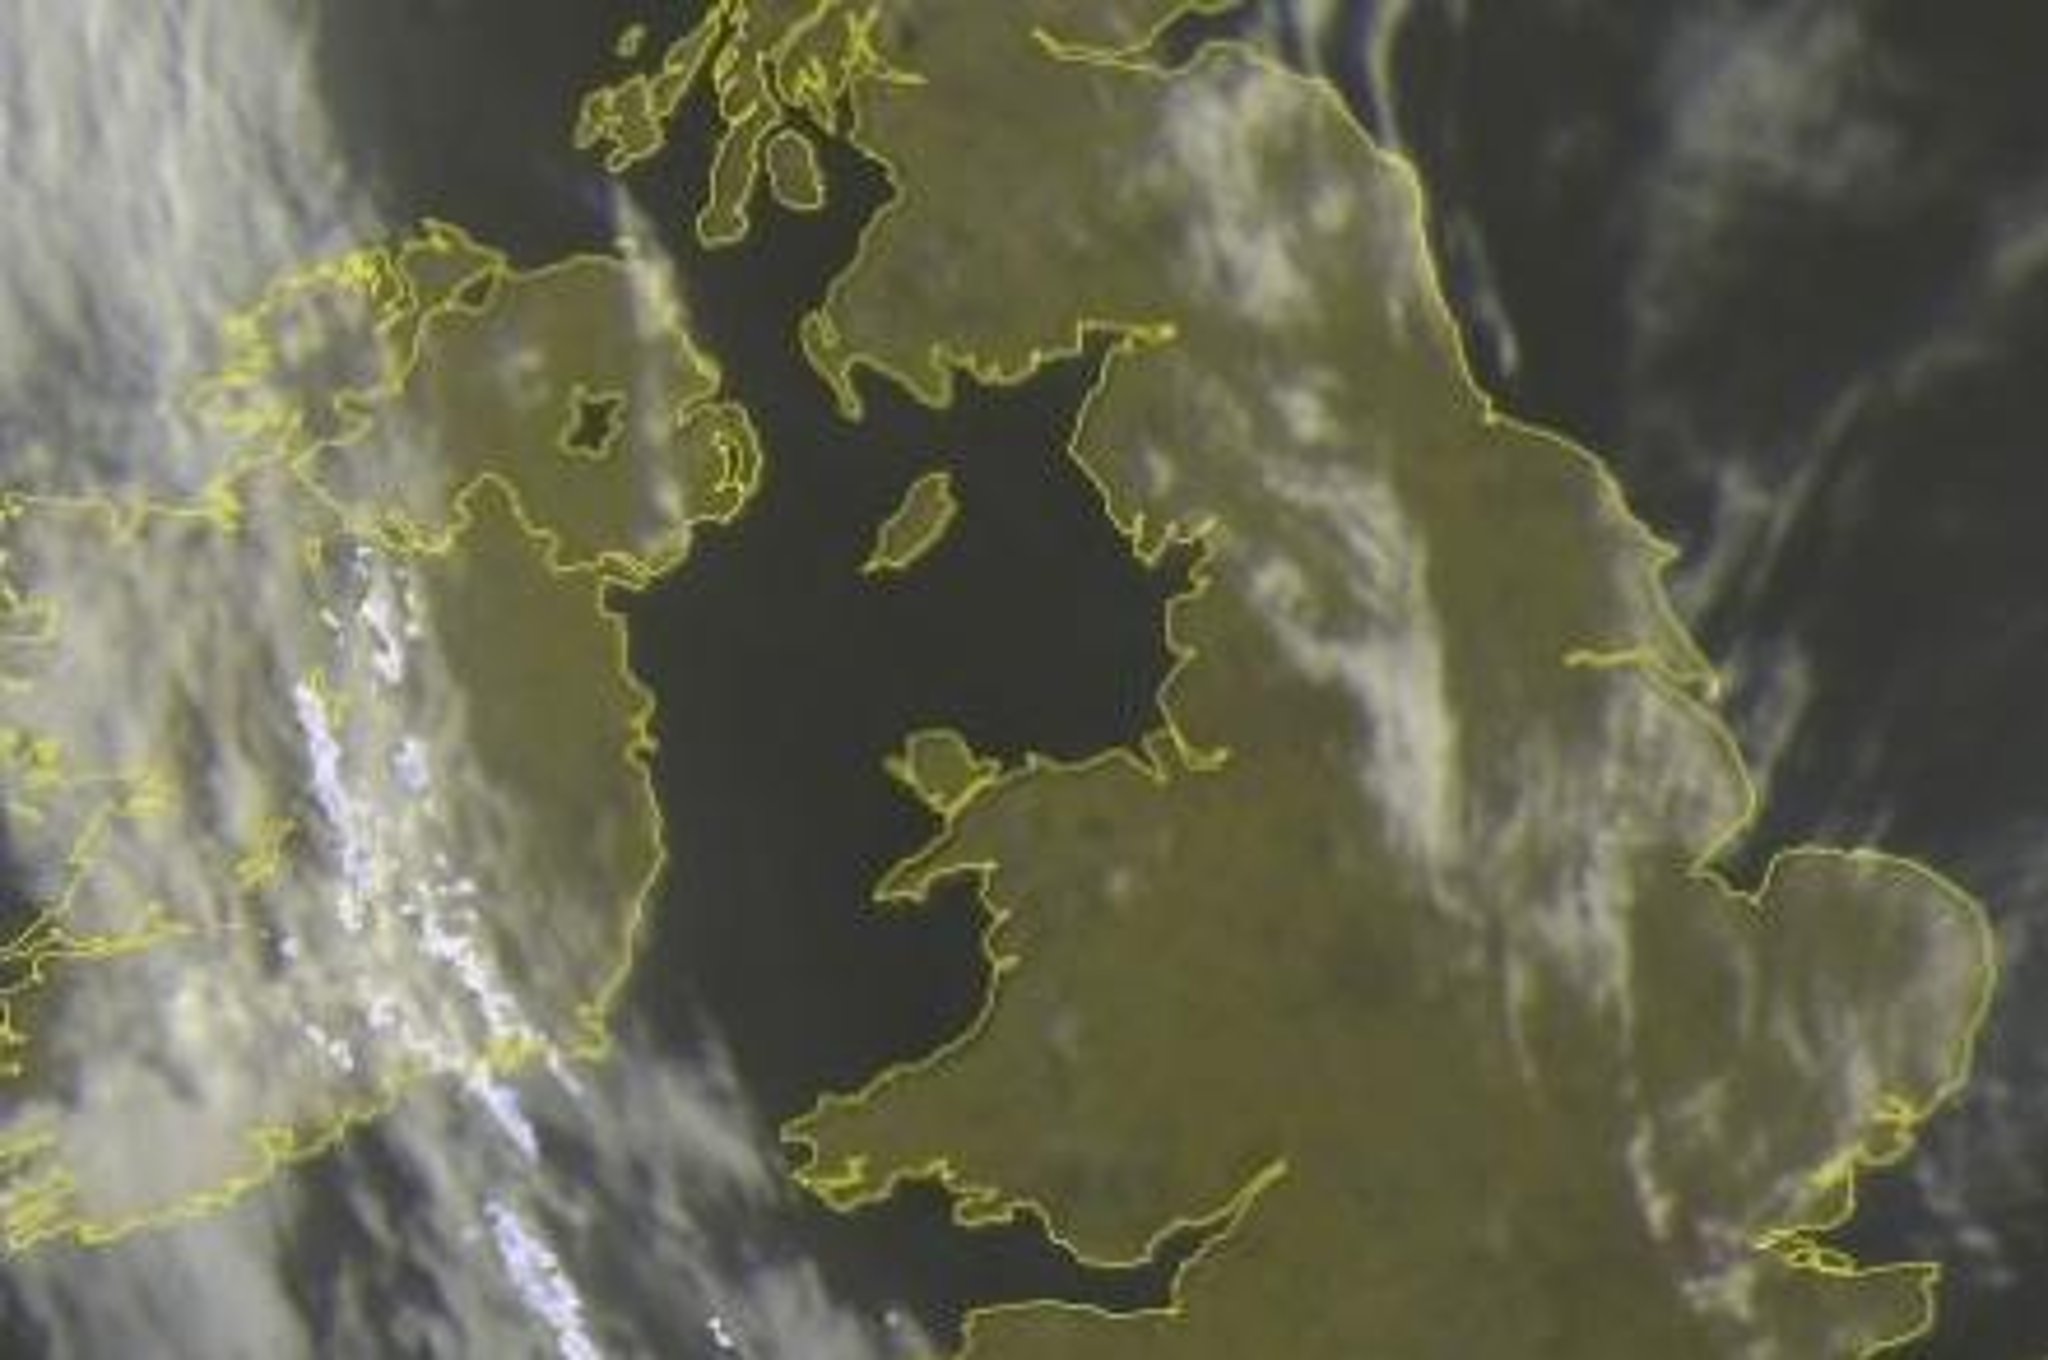 Weather: It is mostly cloudless and sunny across Northern Ireland this morning